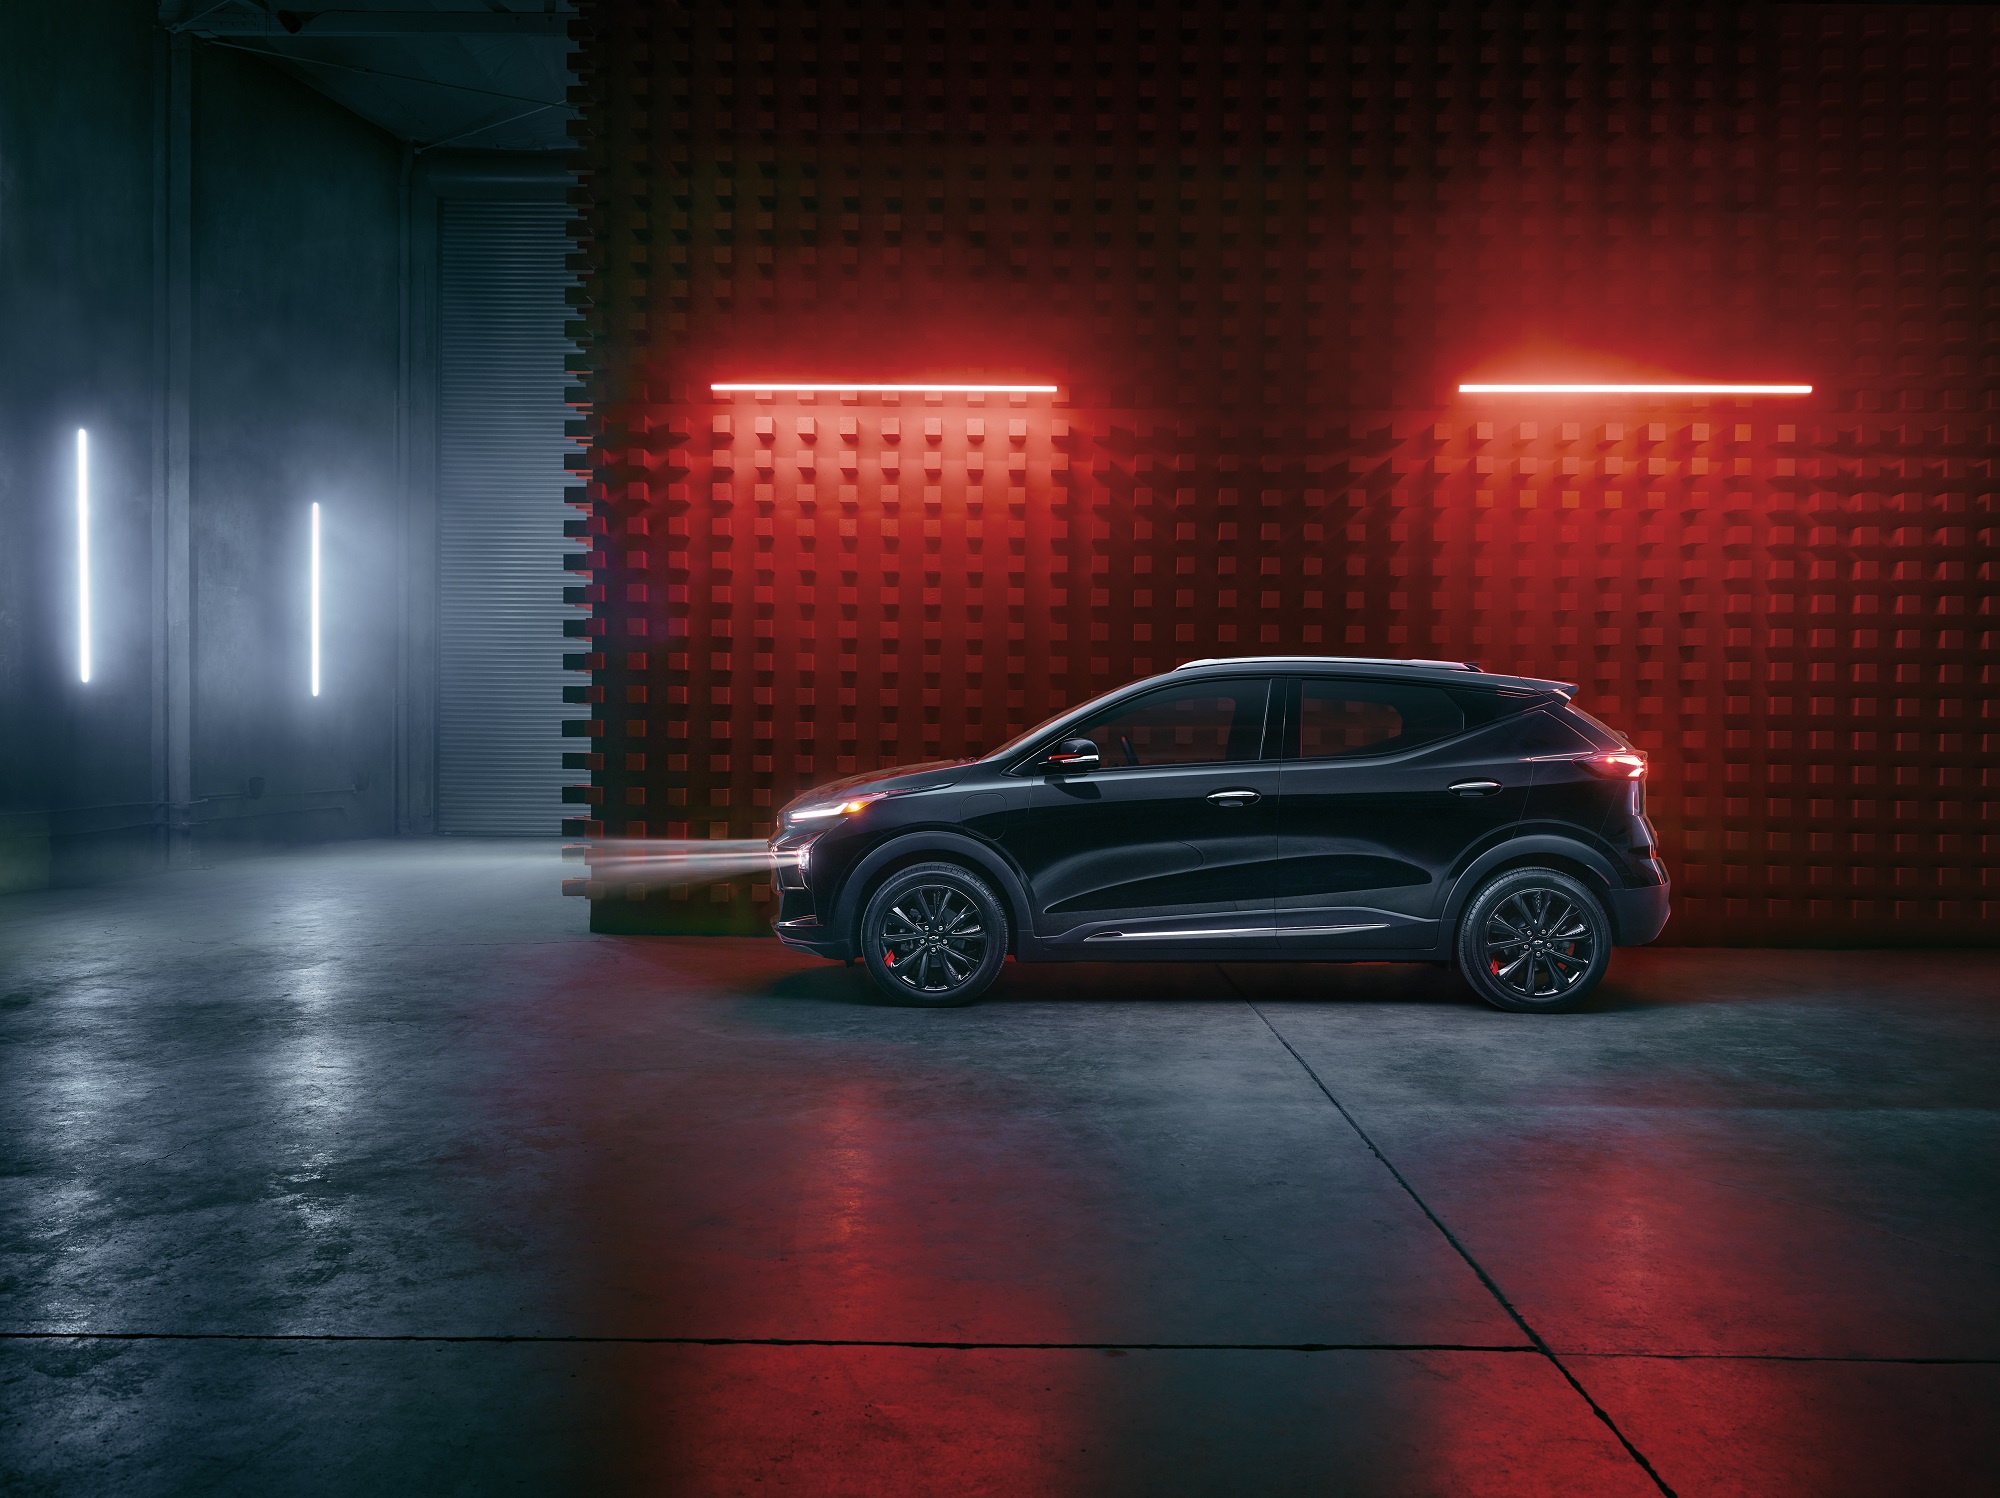 The Chevrolet Bolt EUV shows off its cheap electric car dimensions and Redline trim in a dark warehouse.